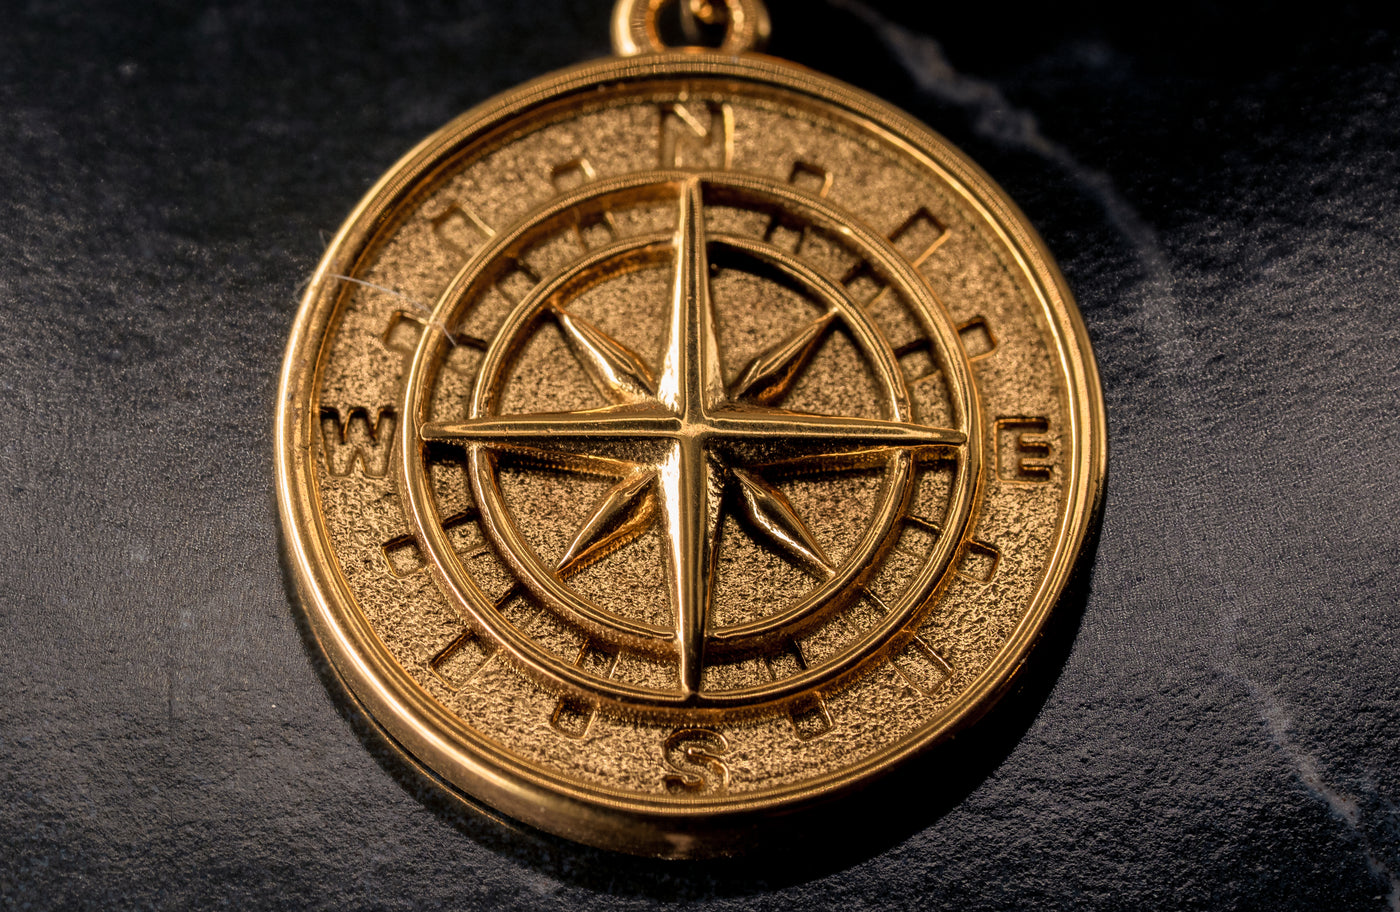 Compass Pendant - Gold - 18 inch